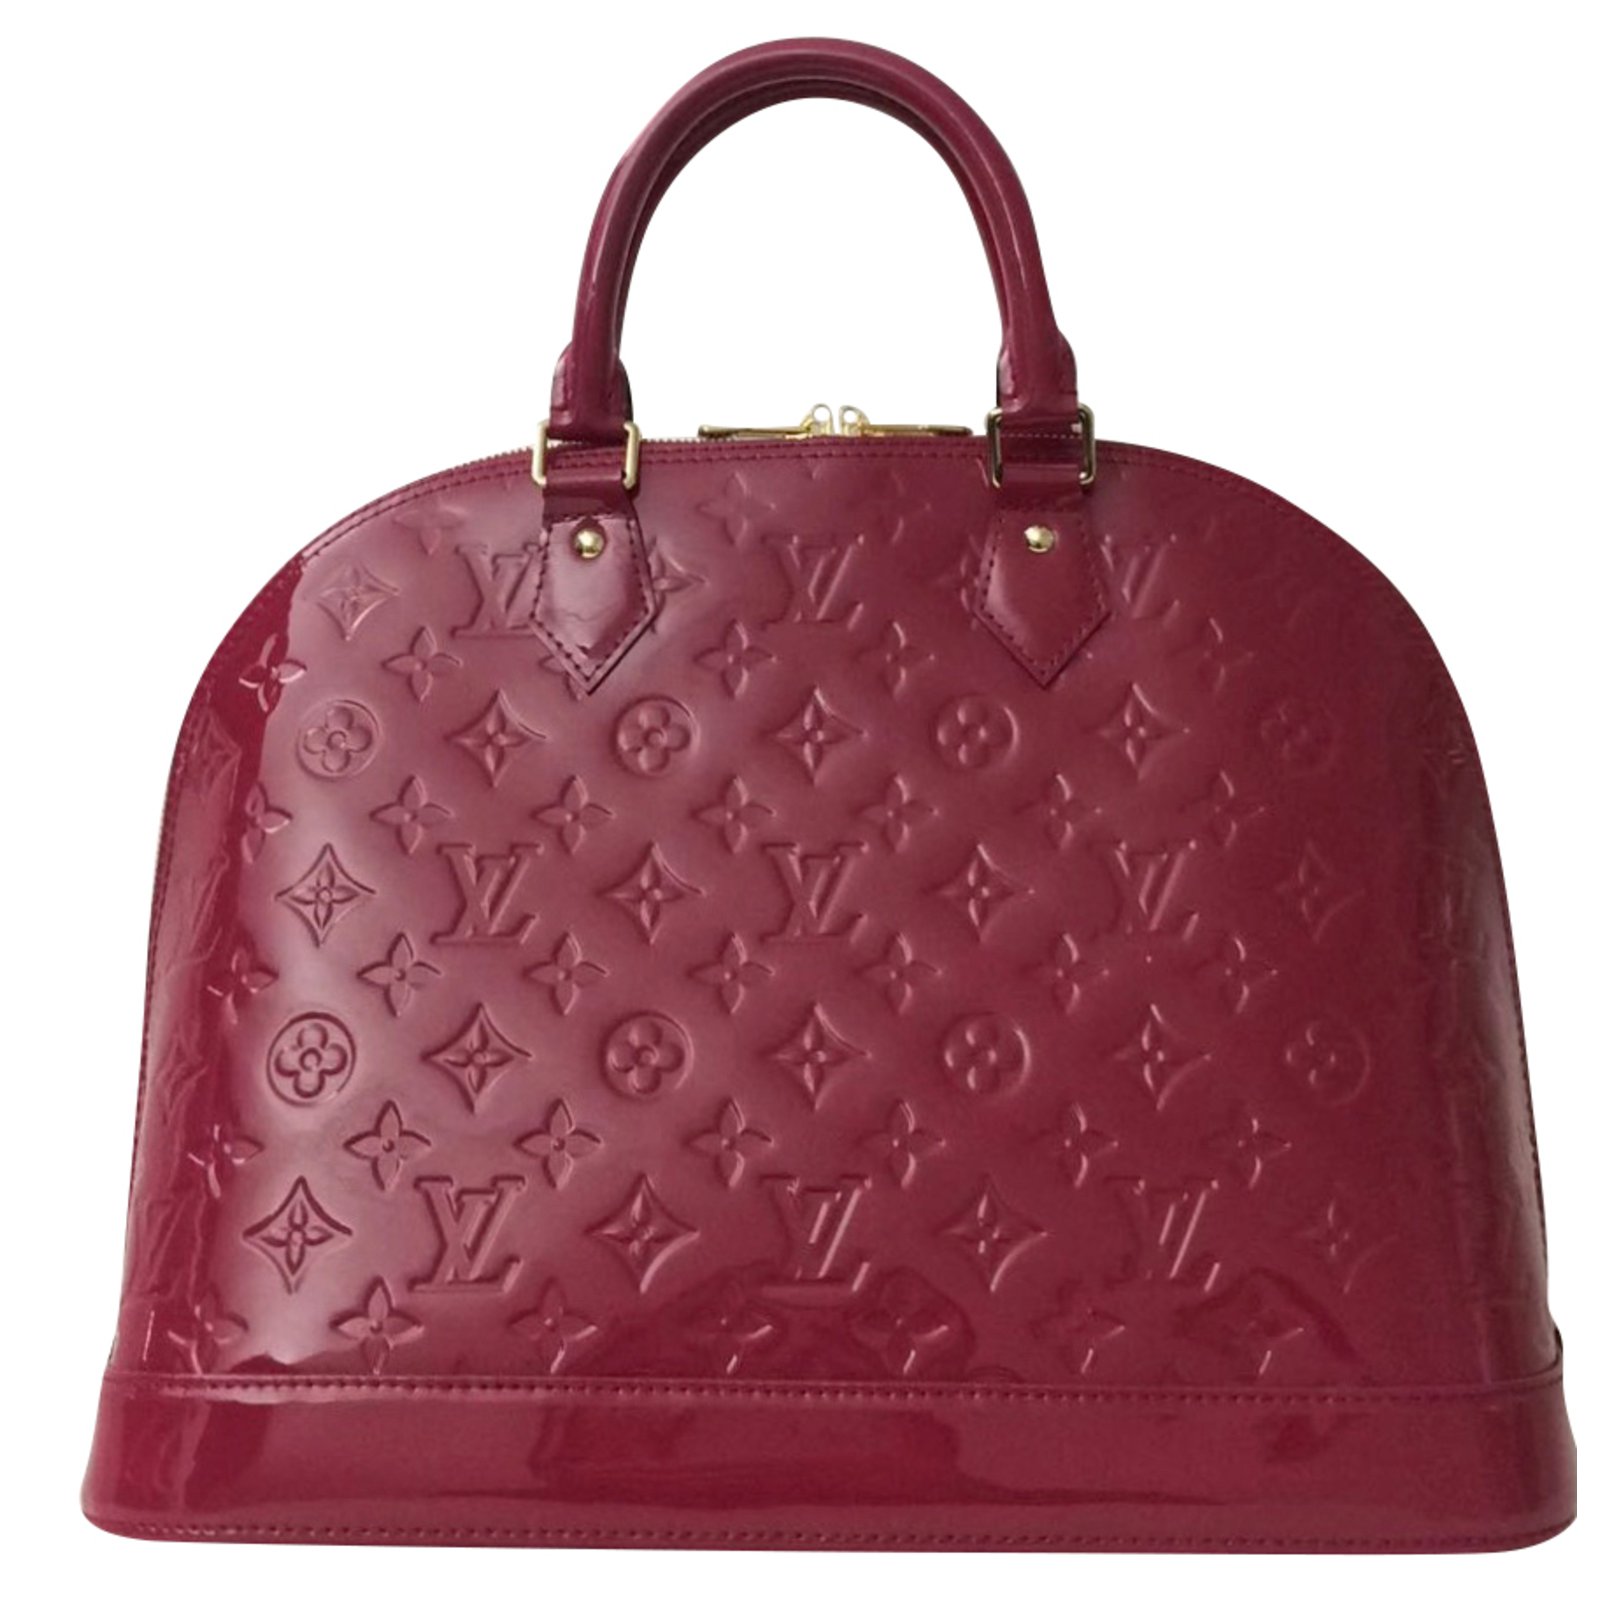 Pink And Black Louis Vuitton Purse | Jaguar Clubs of North America